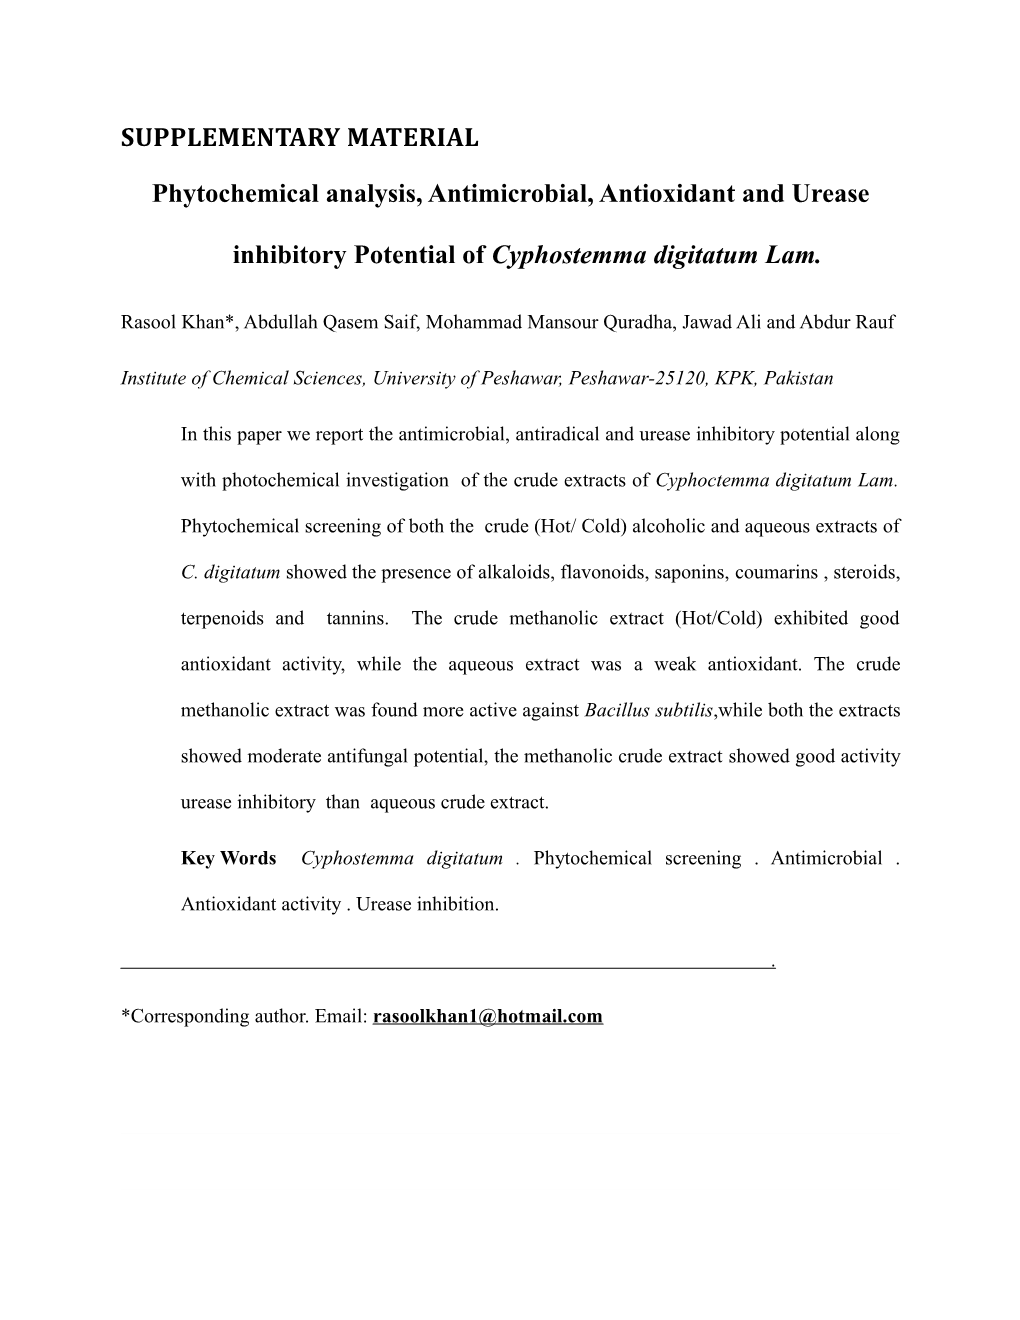 Phytochemical Analysis, Antimicrobial, Antioxidant and Urease Inhibitory Potential Of